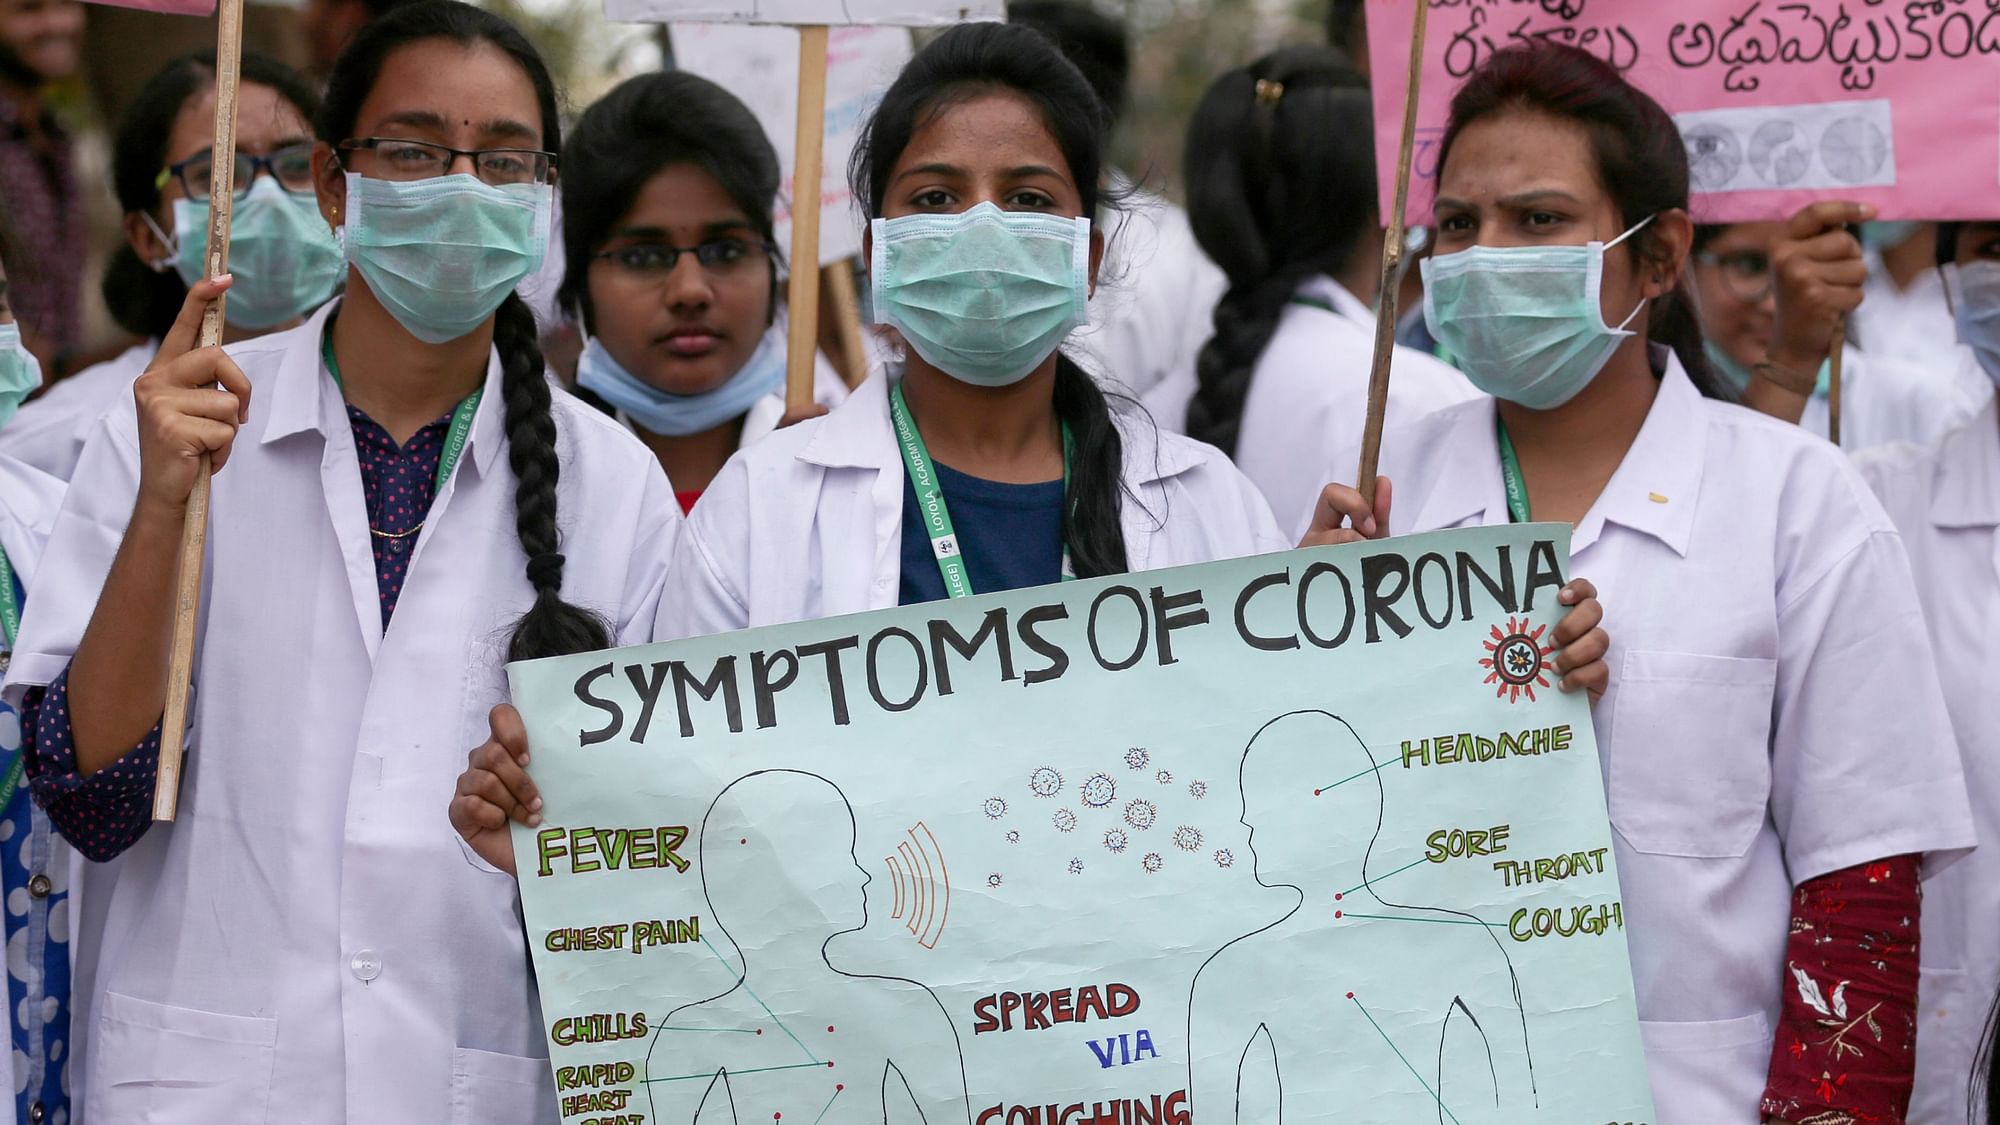 Indian medical students hold a placard during an awareness rally for COVID-19 in Hyderabad on 6 March 2020. Image used for representational purposes.